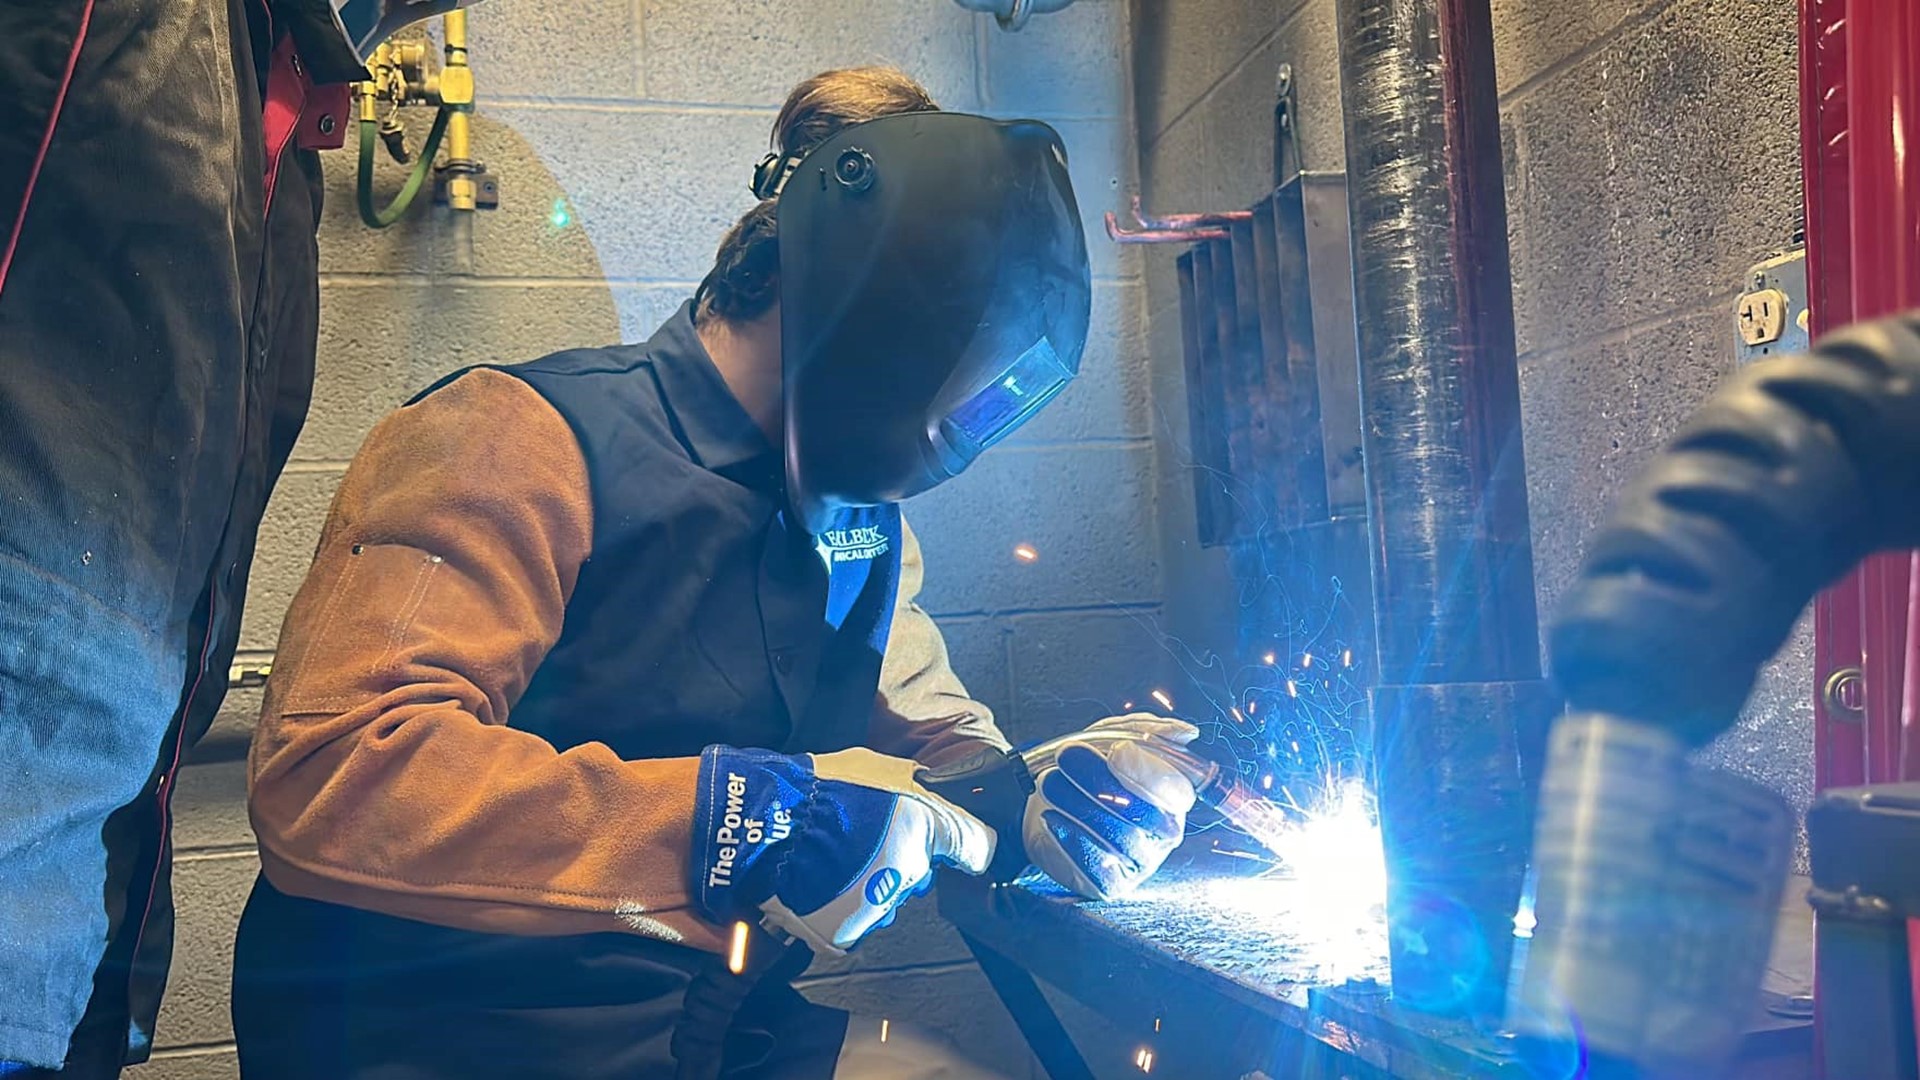 FOX43's Tyler Hatfield visited Earlbeck Gases and Technologies Welding Training Center in York County to learn what it takes to be a welder.